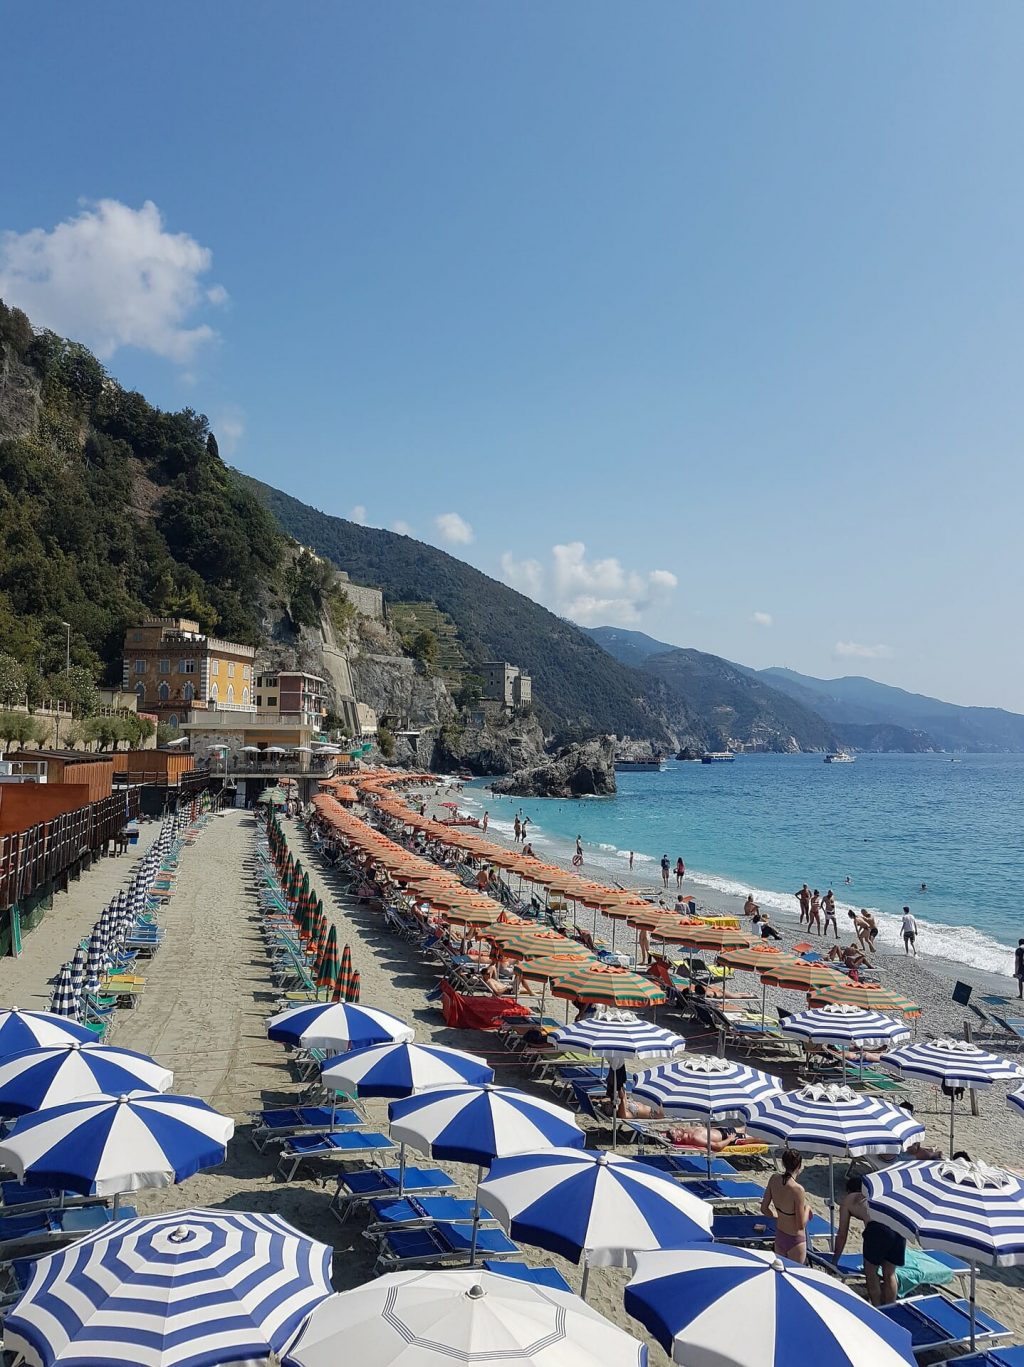 Clusters of colorful beach umbrellas shading visitors and Monterosso locals